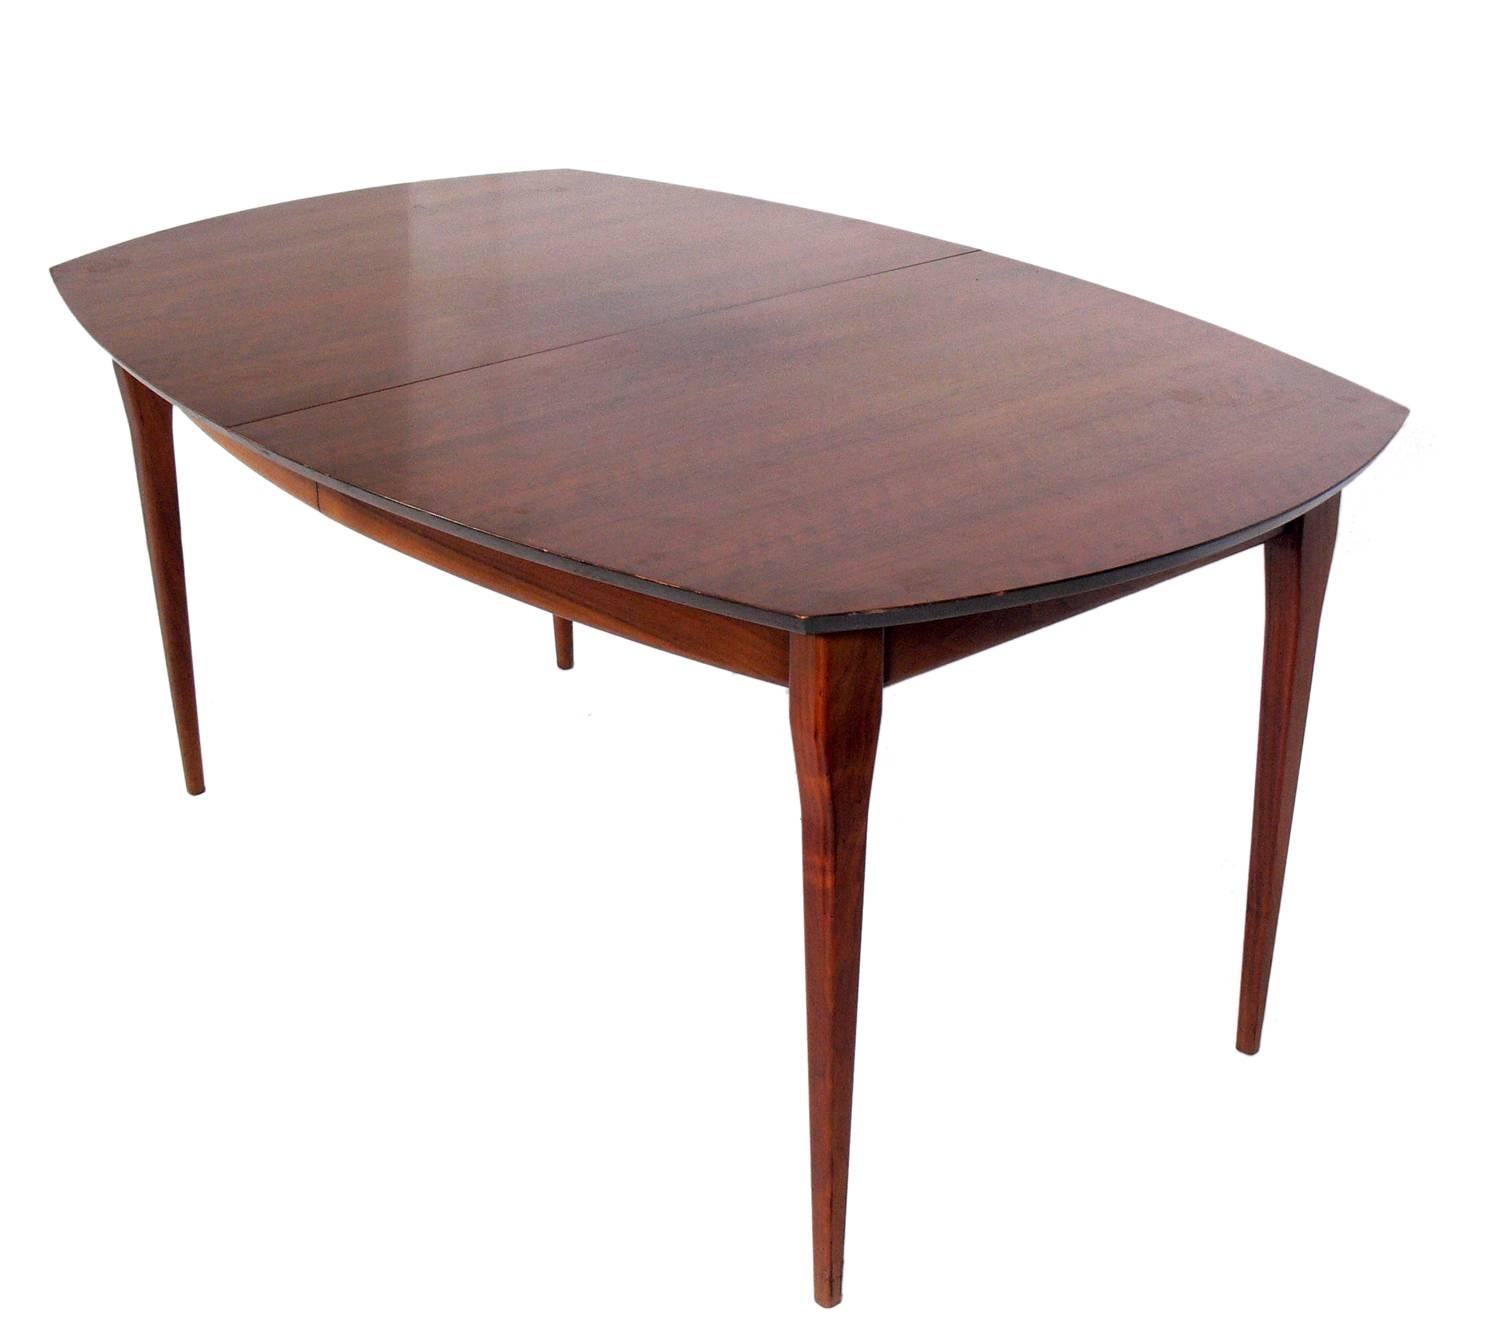 Italian modern dining table, designed by Bertha Schaefer for Singer and Sons, Italy, circa 1950s. Schaefer was one of the leading female designers of the era, and designed this line for Singer and Sons with her contemporaries Gio Ponti, Carlo de